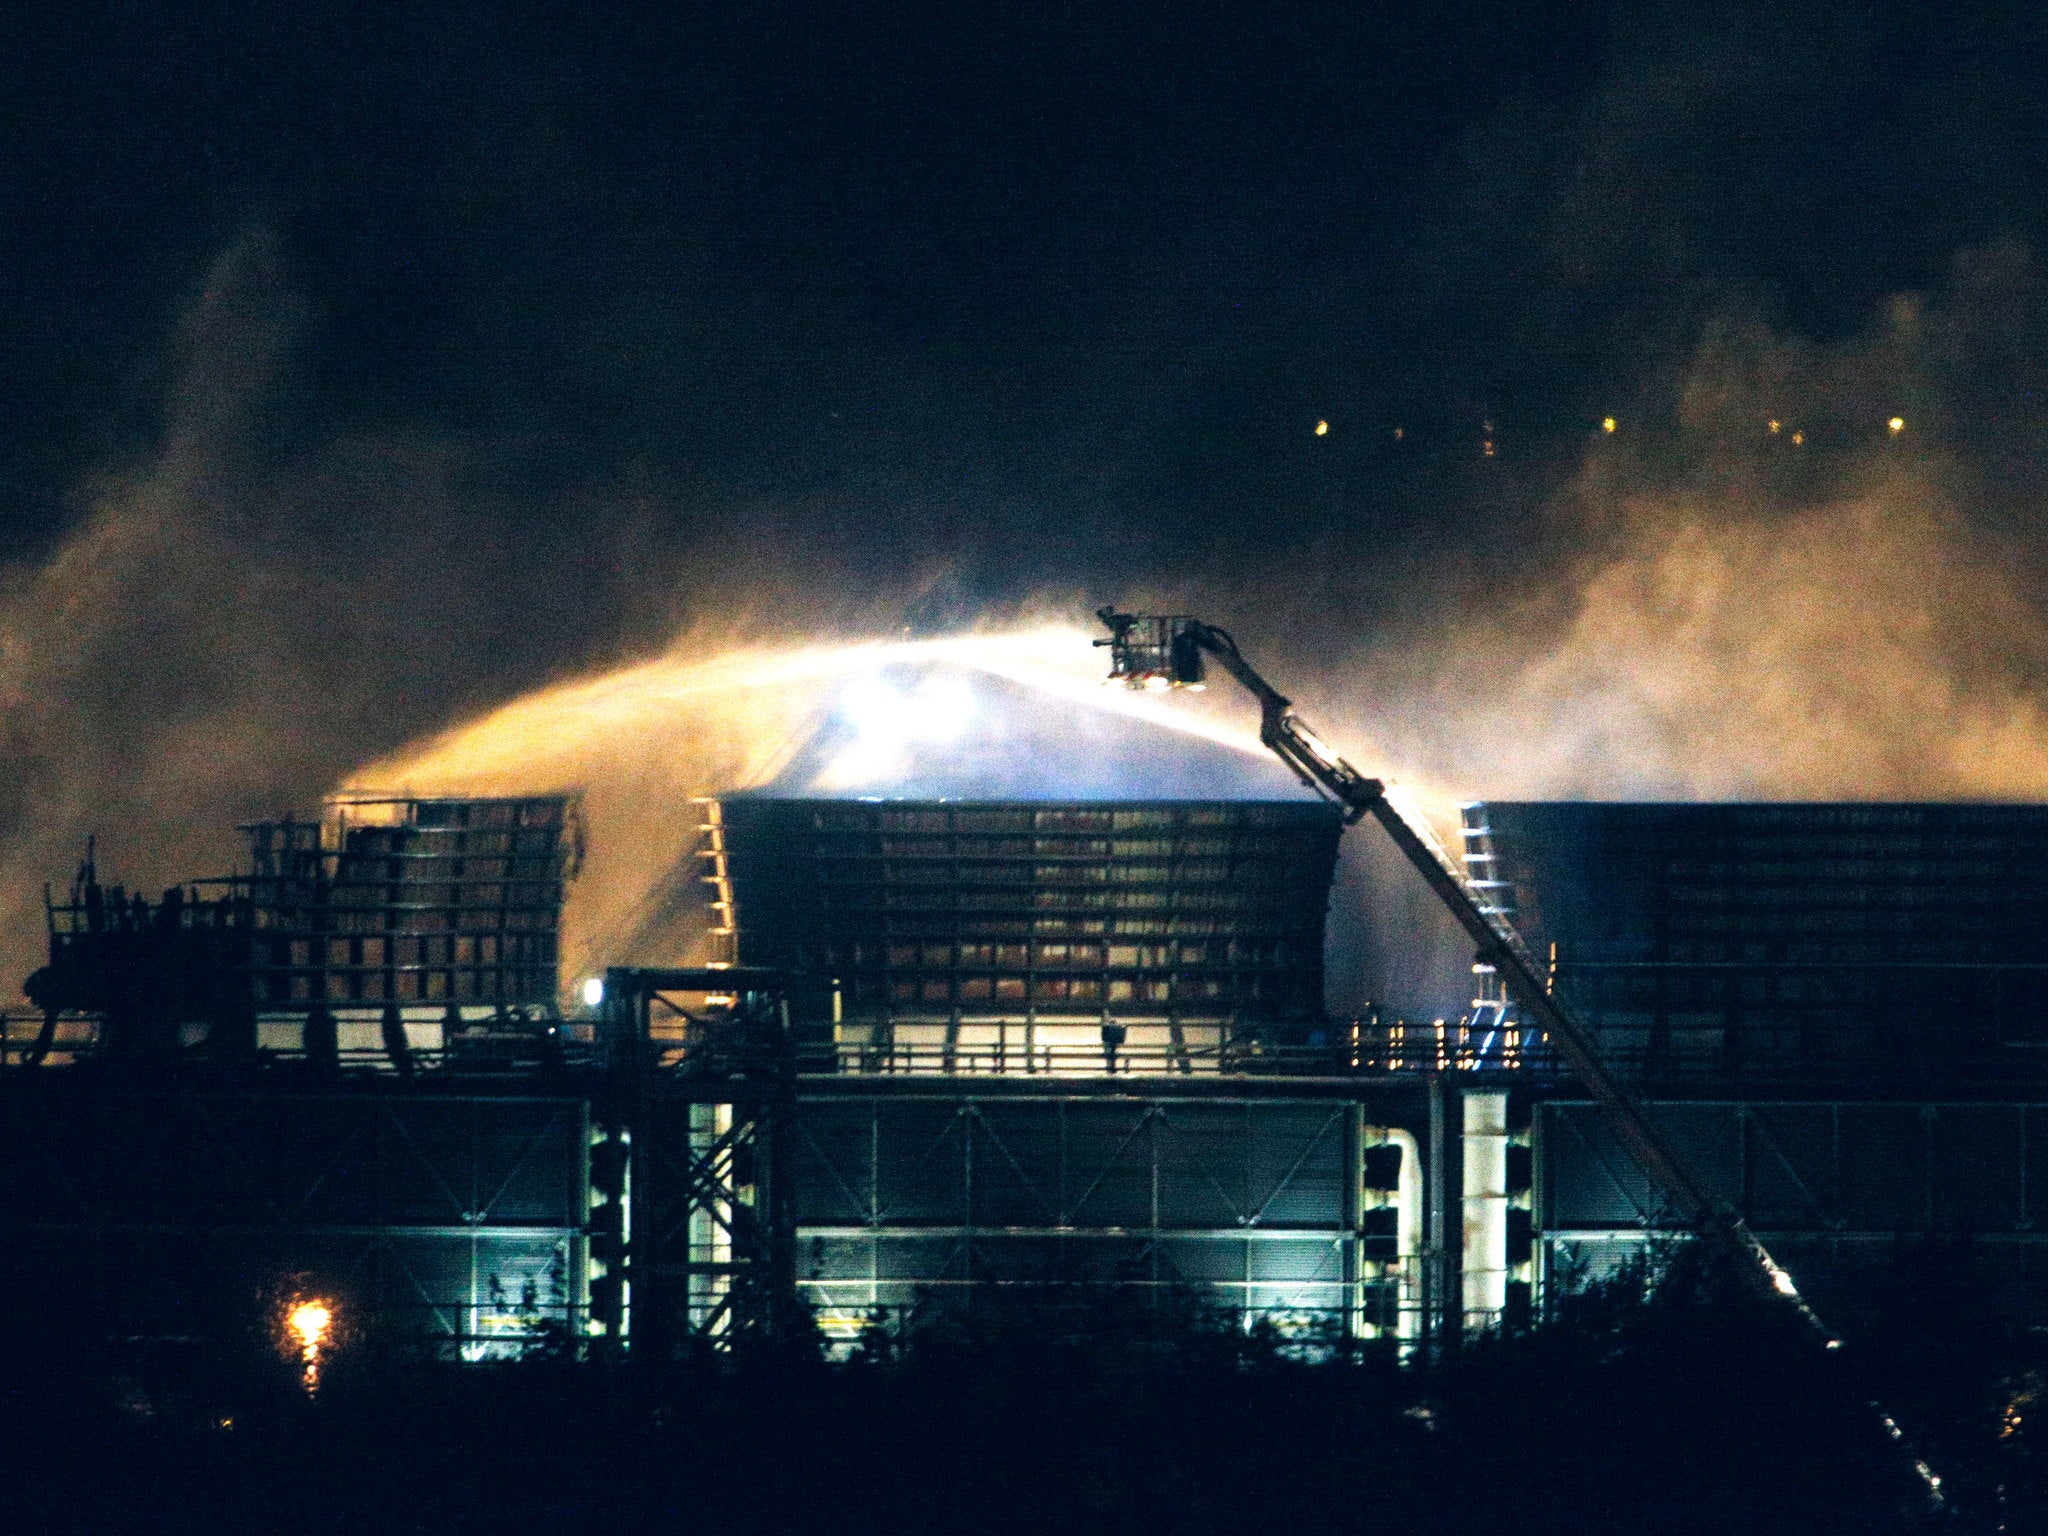 Fire crews spray water at the scene of a fire at Didcot B Power Station in Oxfordshire